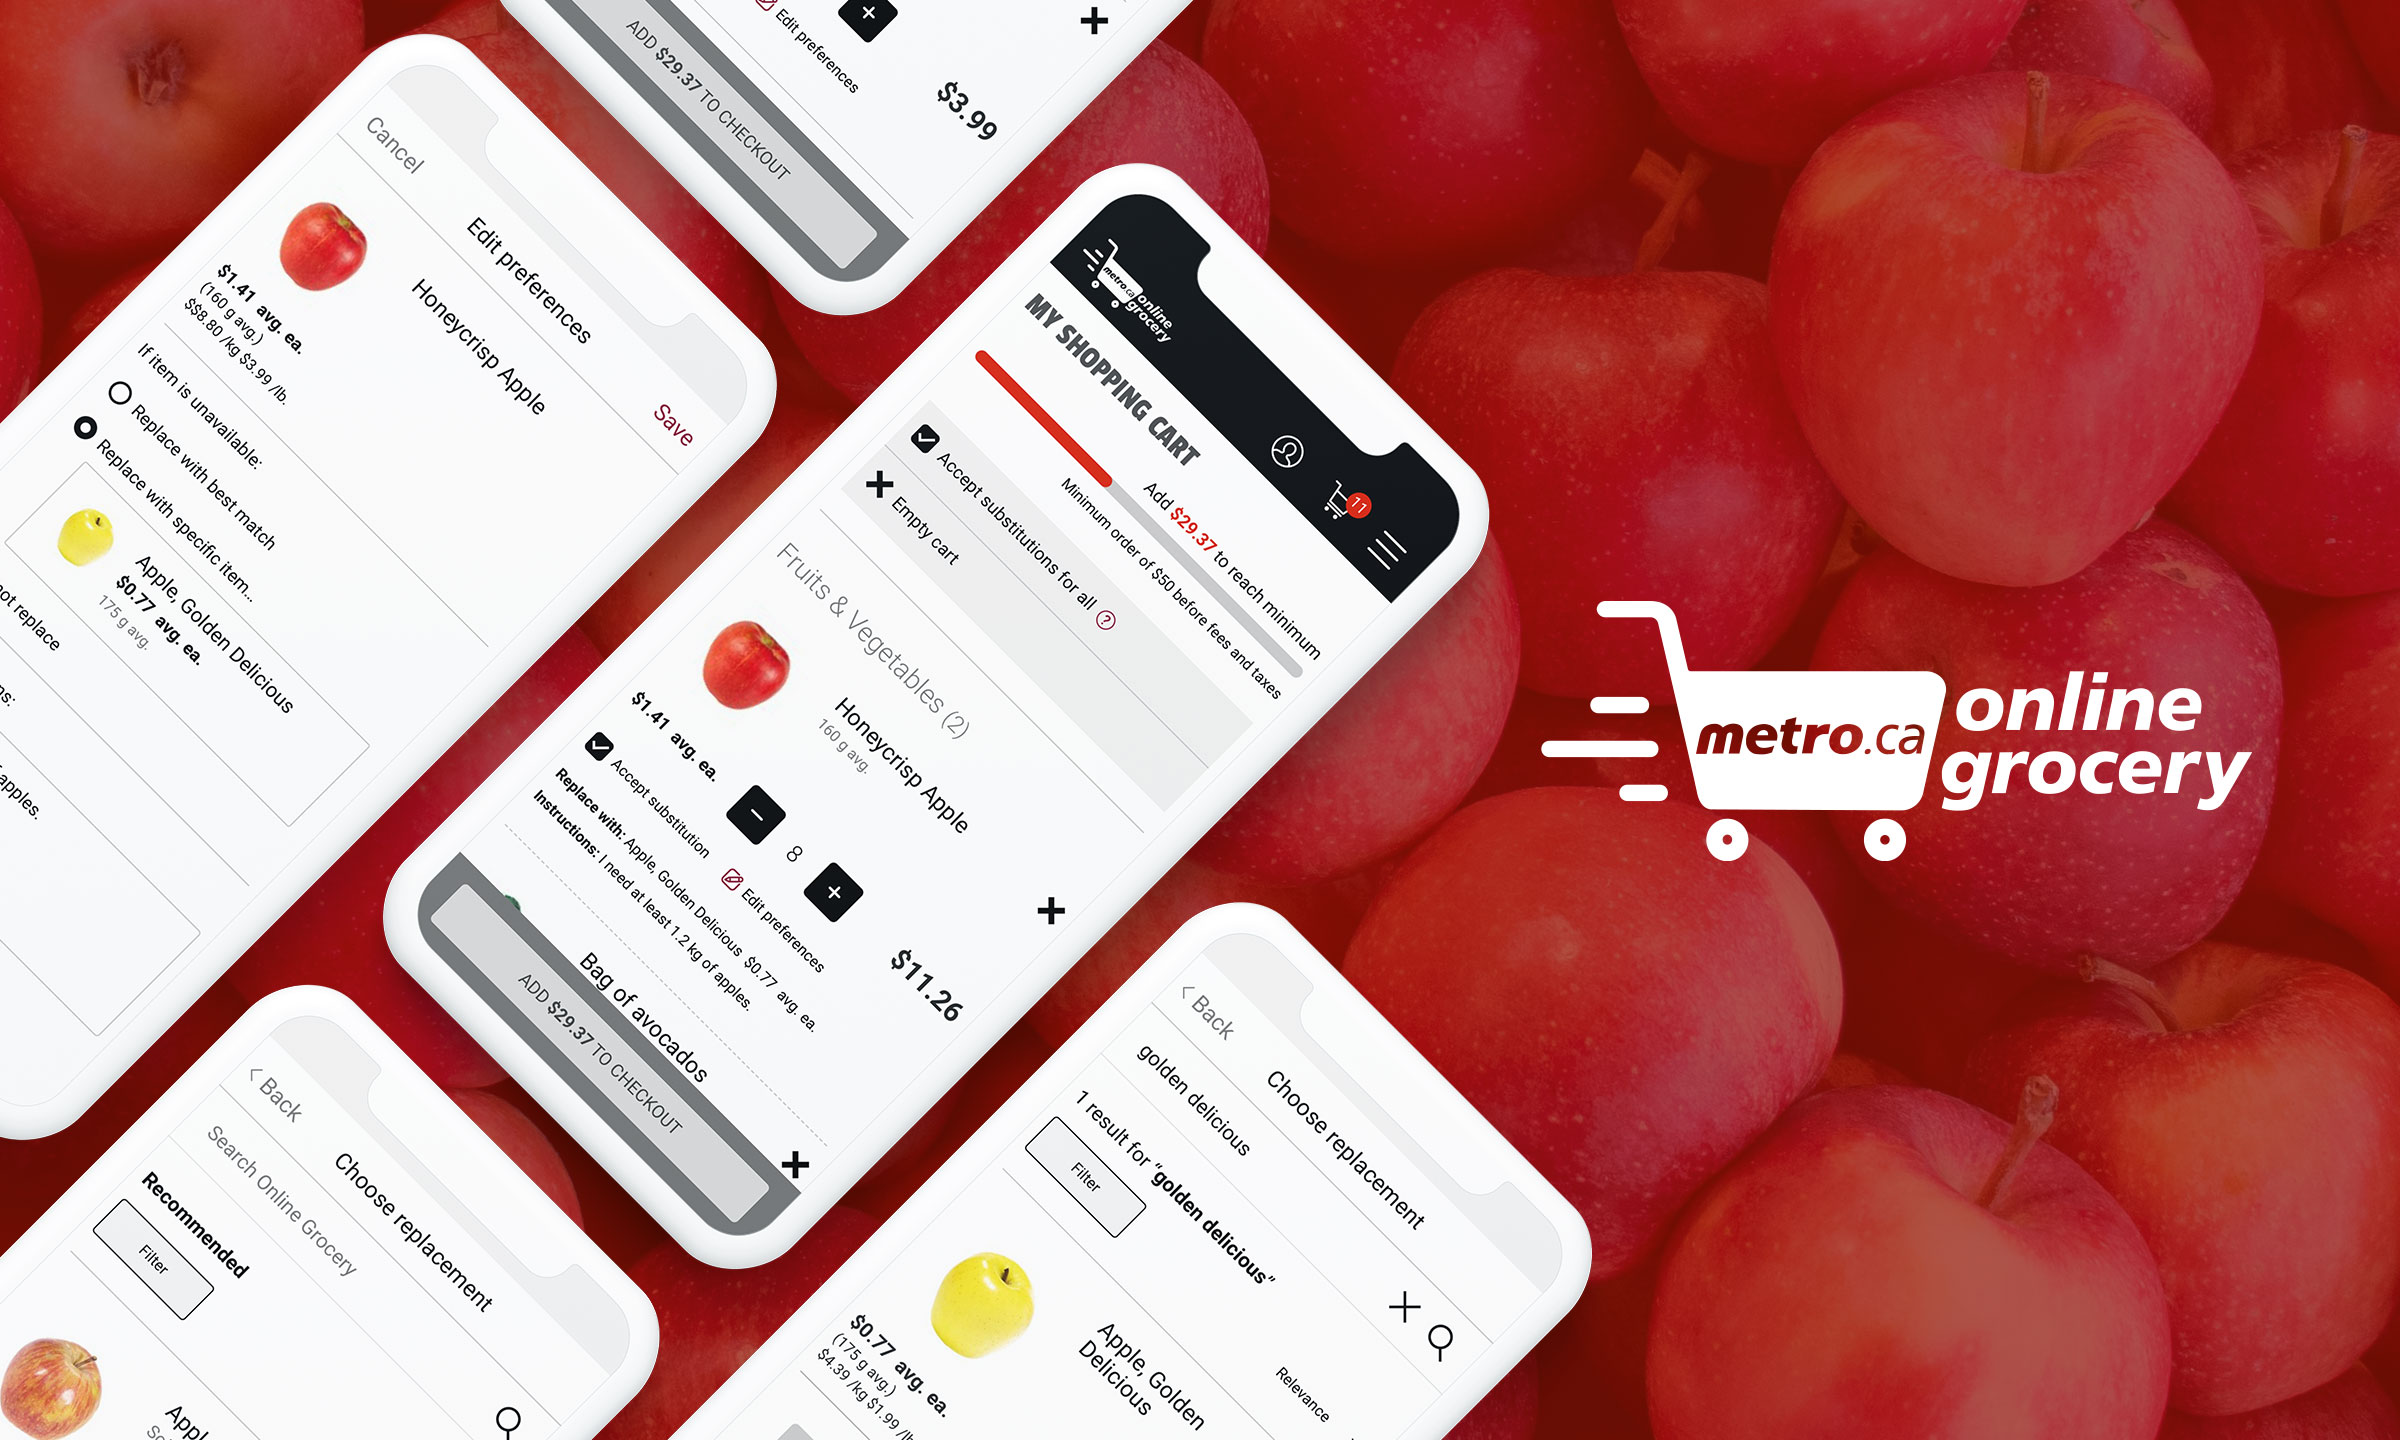 Mobile phones displaying different screens from the Metro grocery delivery app